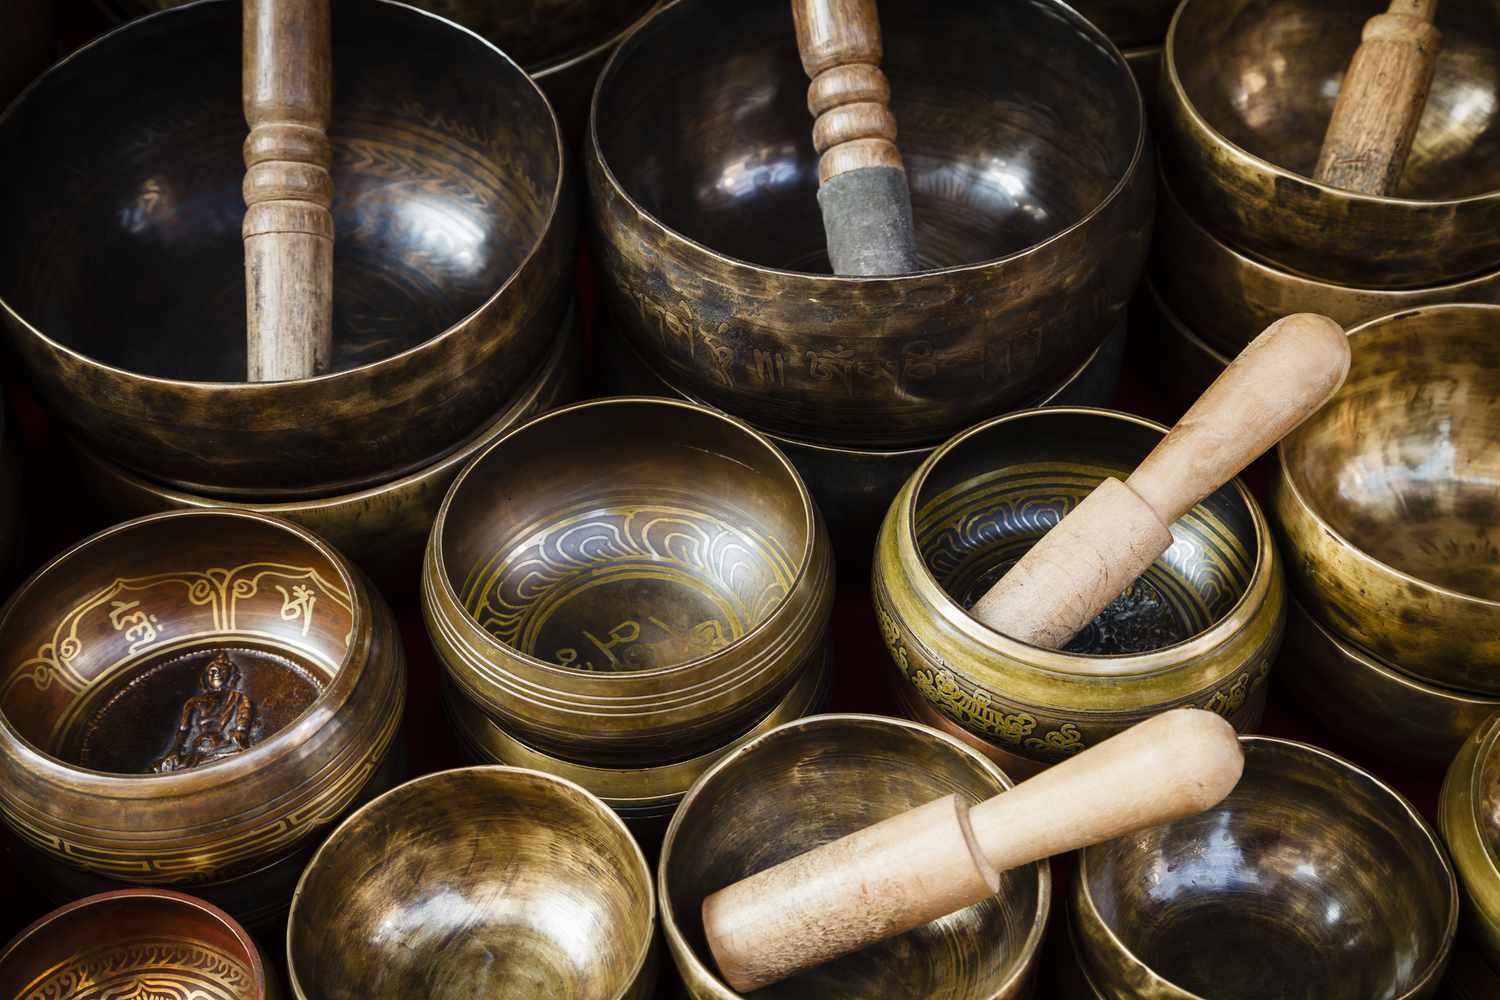 The Sounds of the Singing Bowl